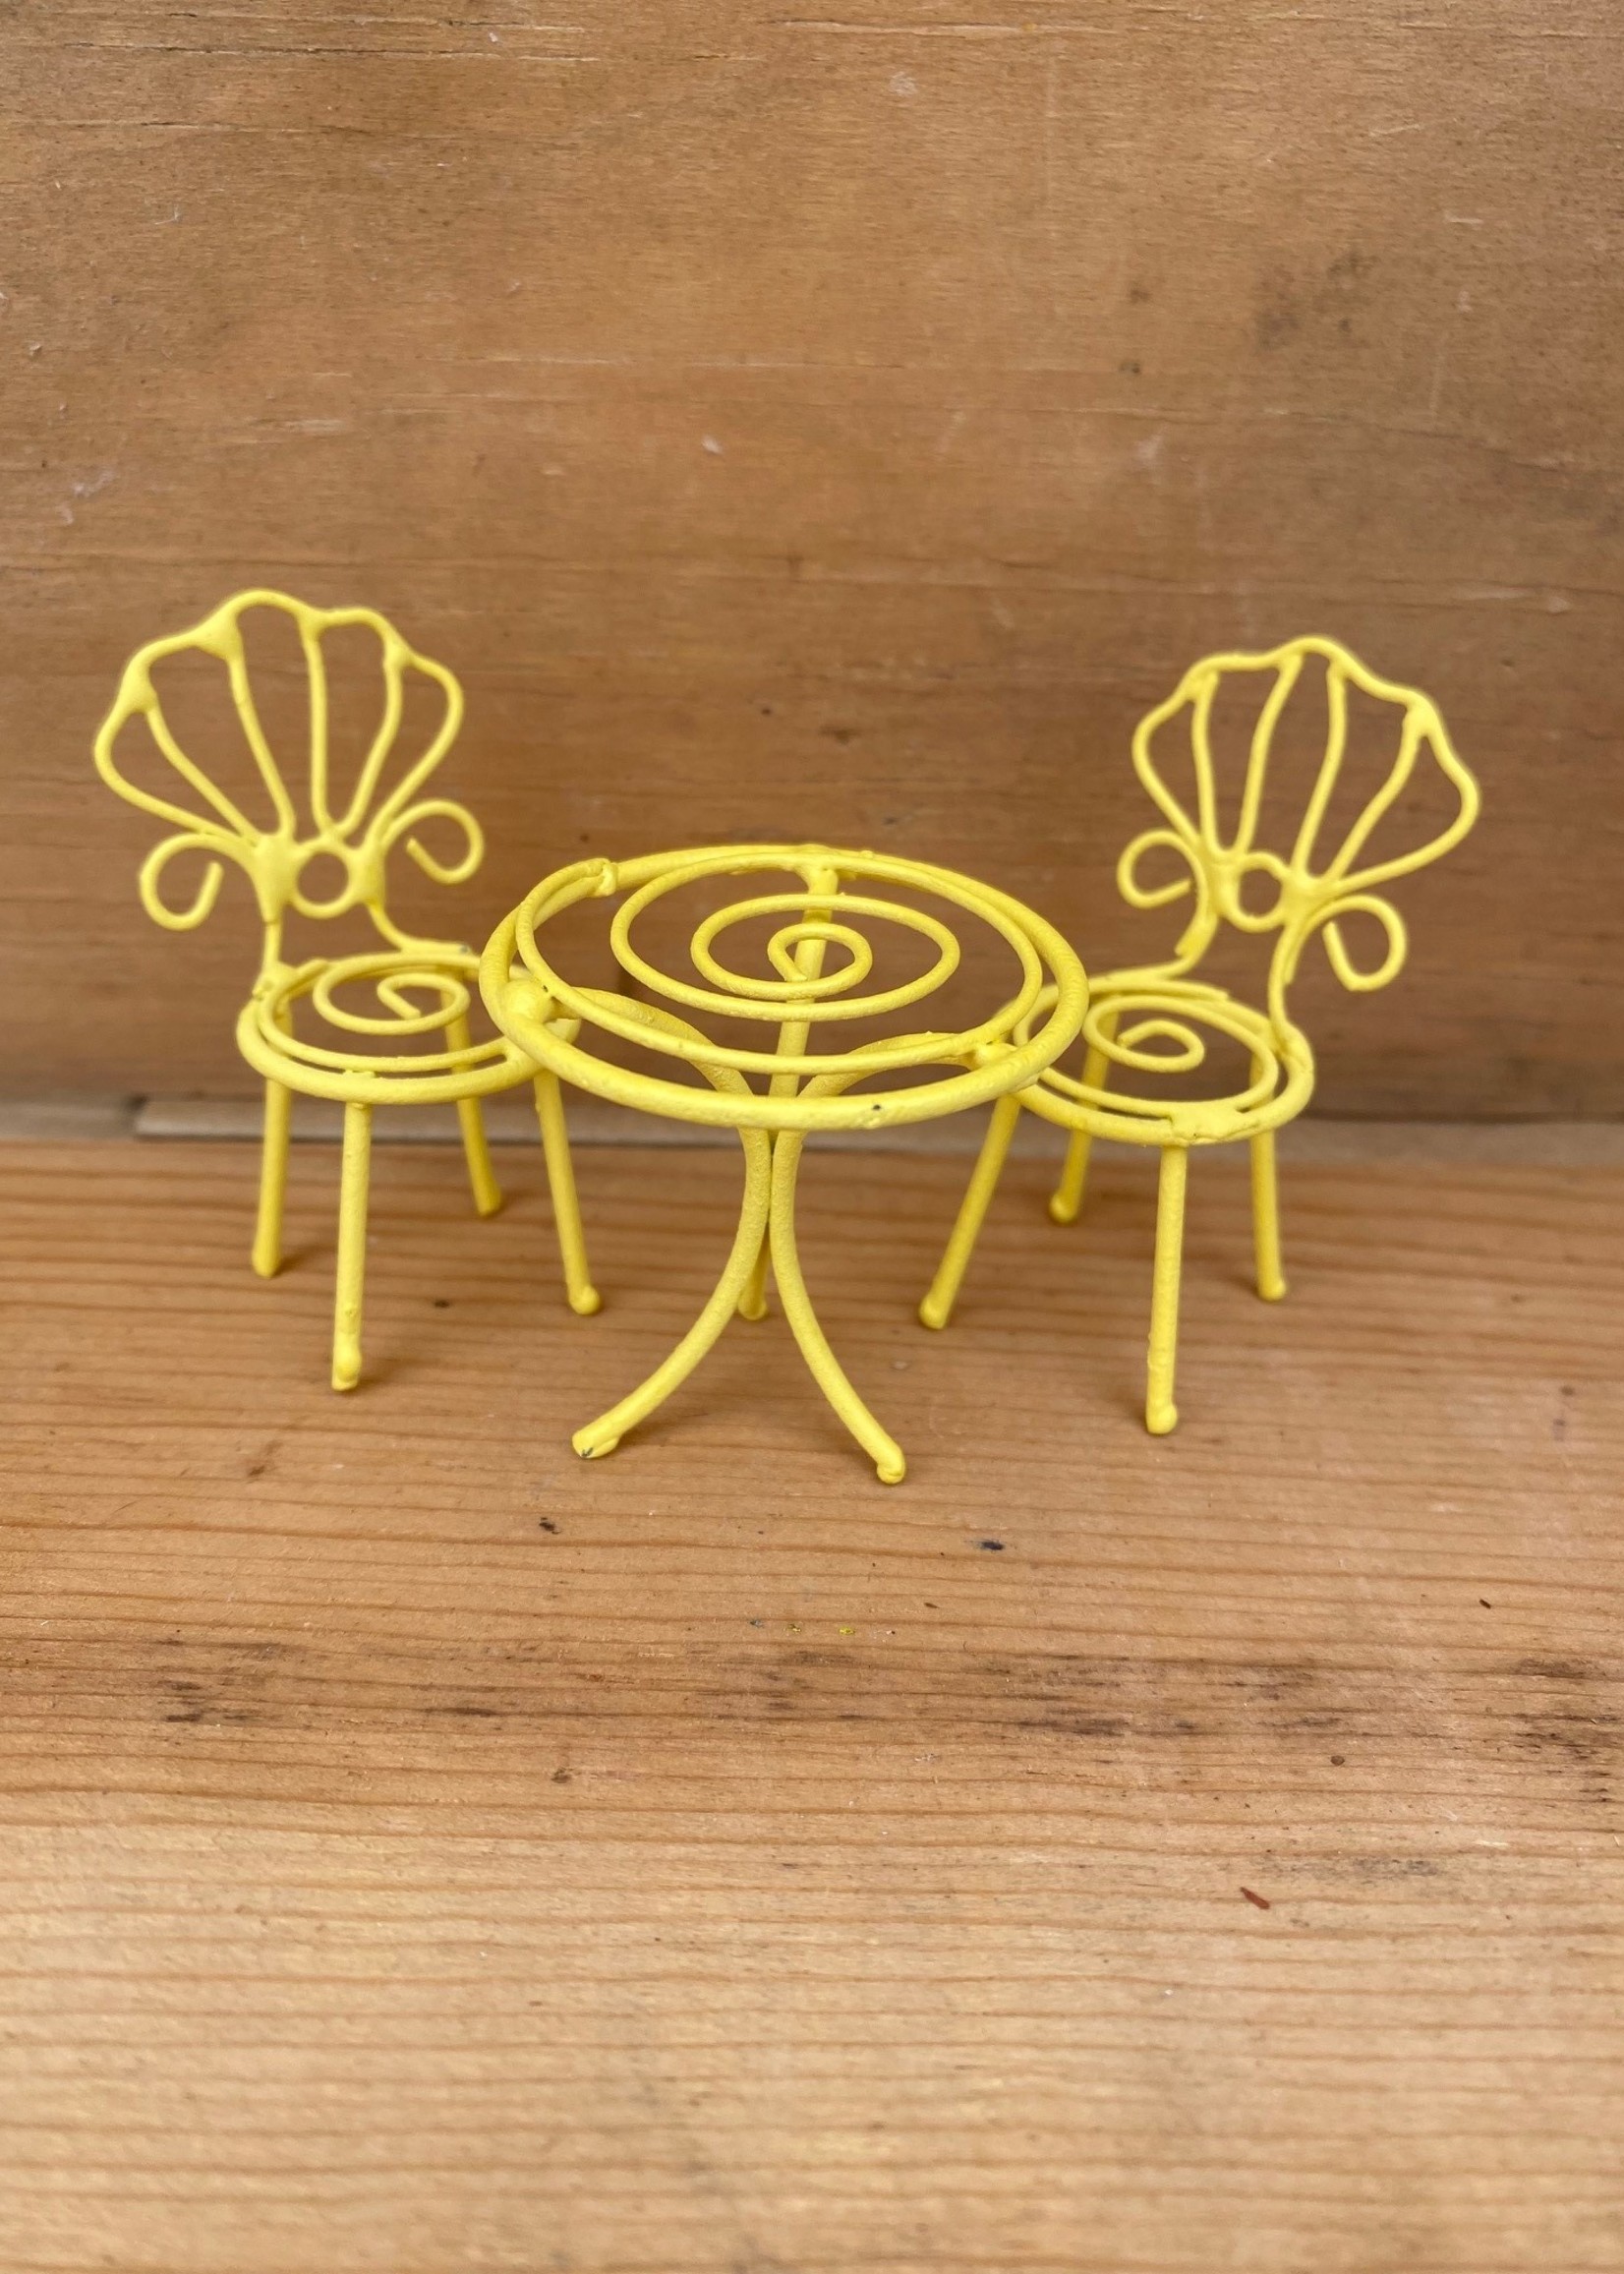 Miniature Bistro Set - 2 Chairs, 1 Table